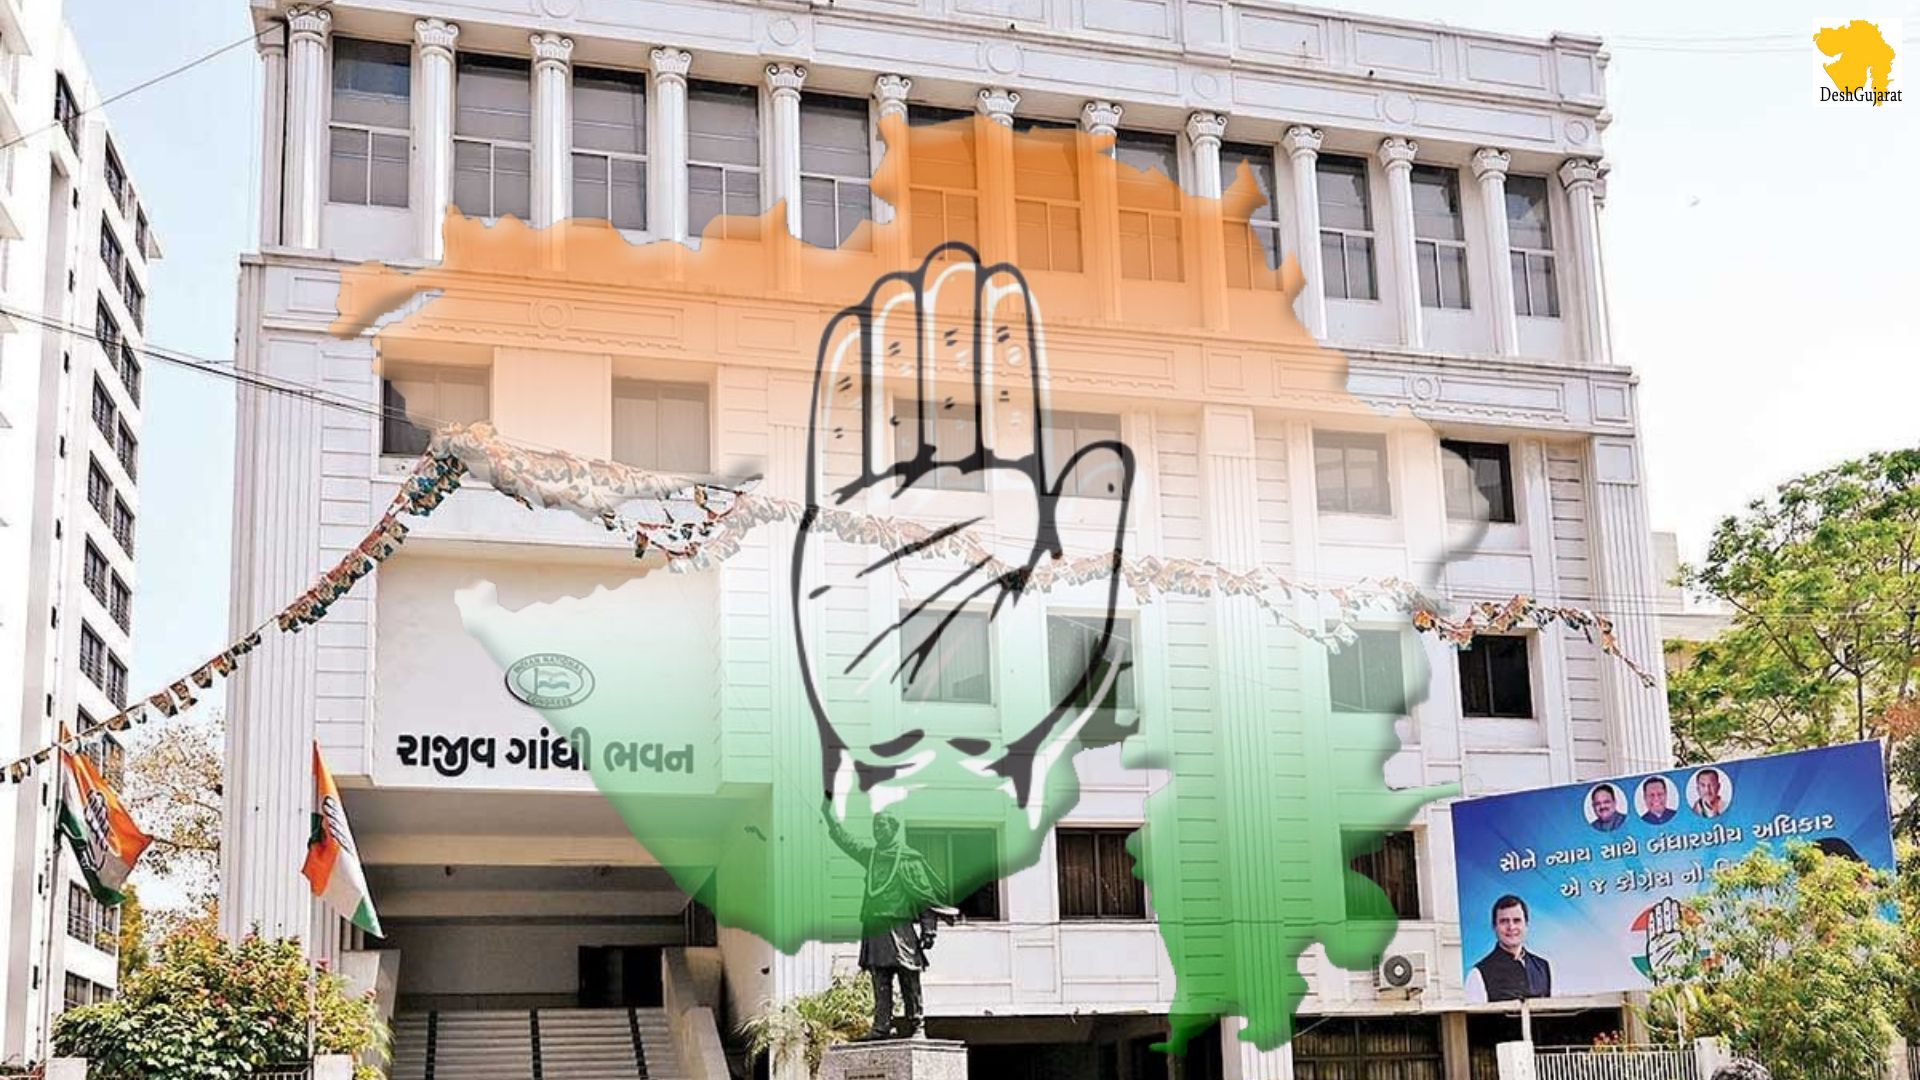 50 congress leaders from Mehsana quit